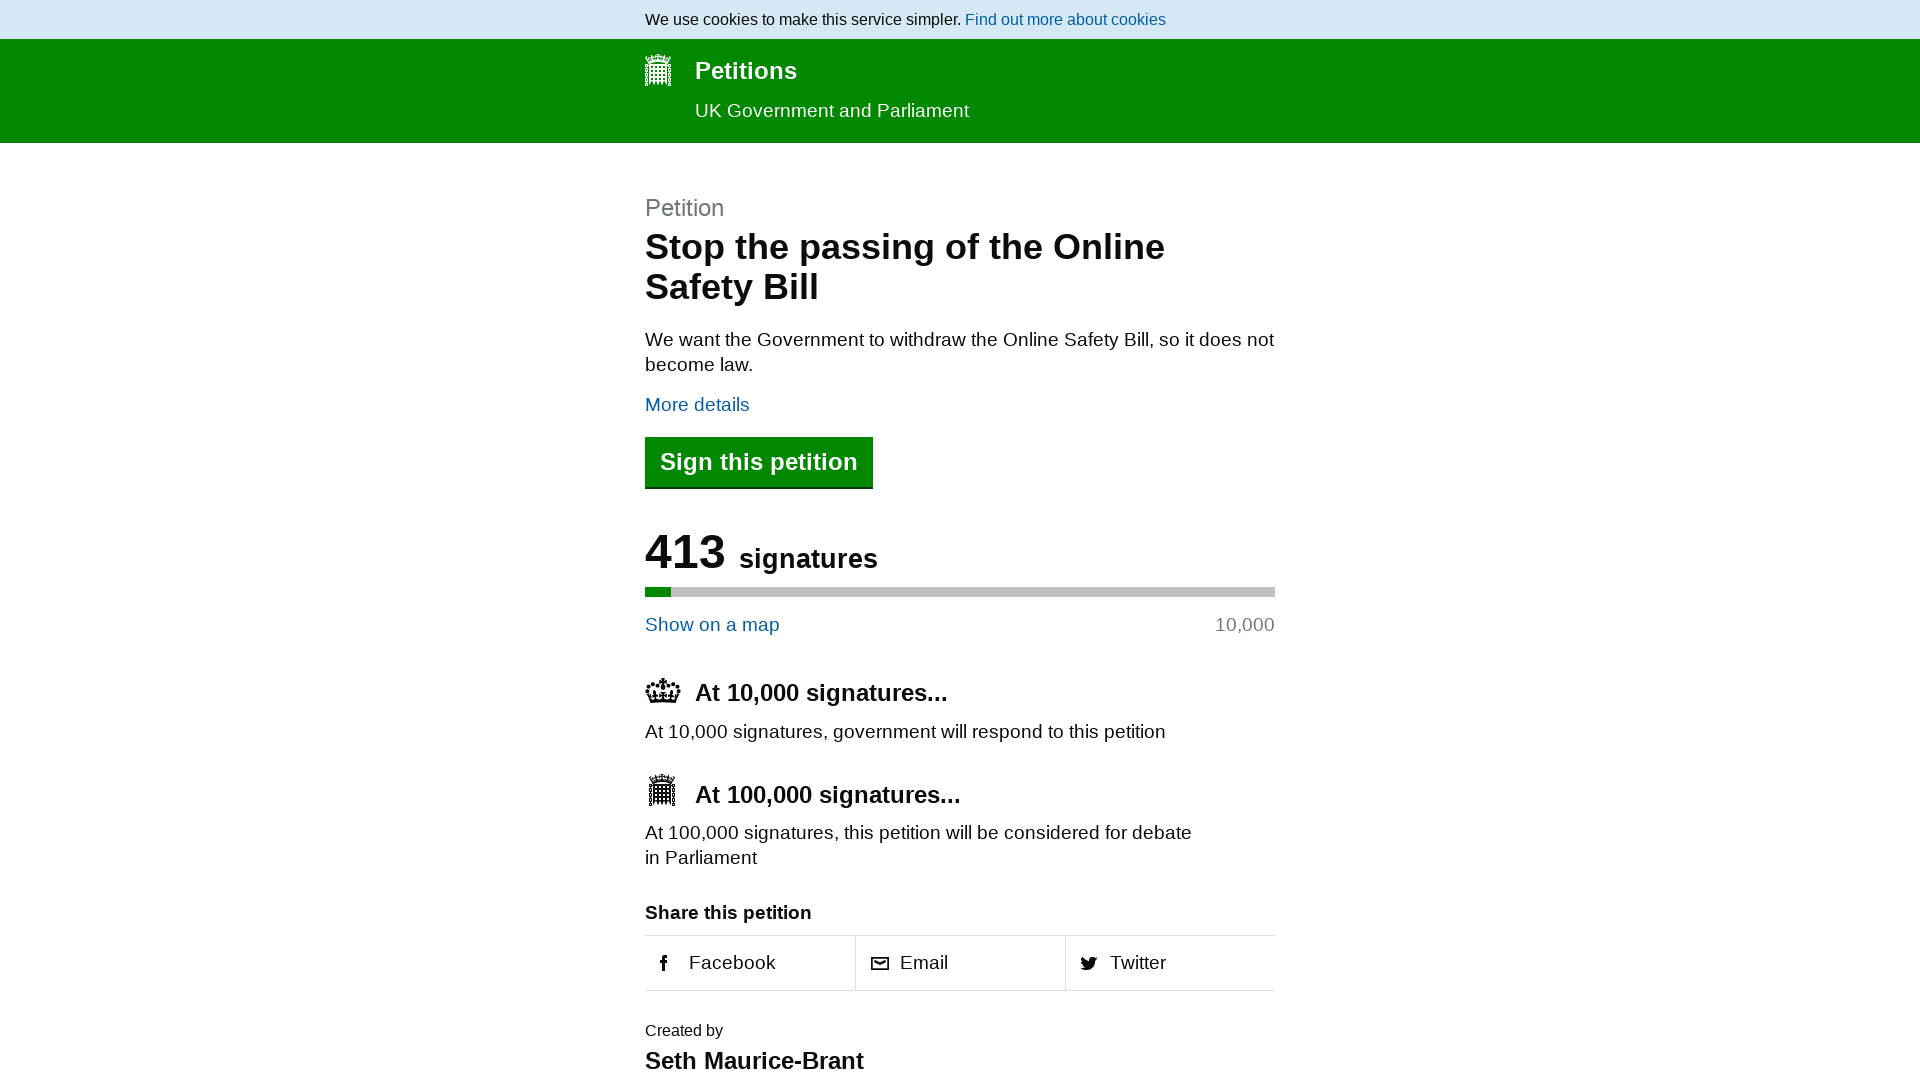 Stop the passing of the Online Safety Bill - Petitions